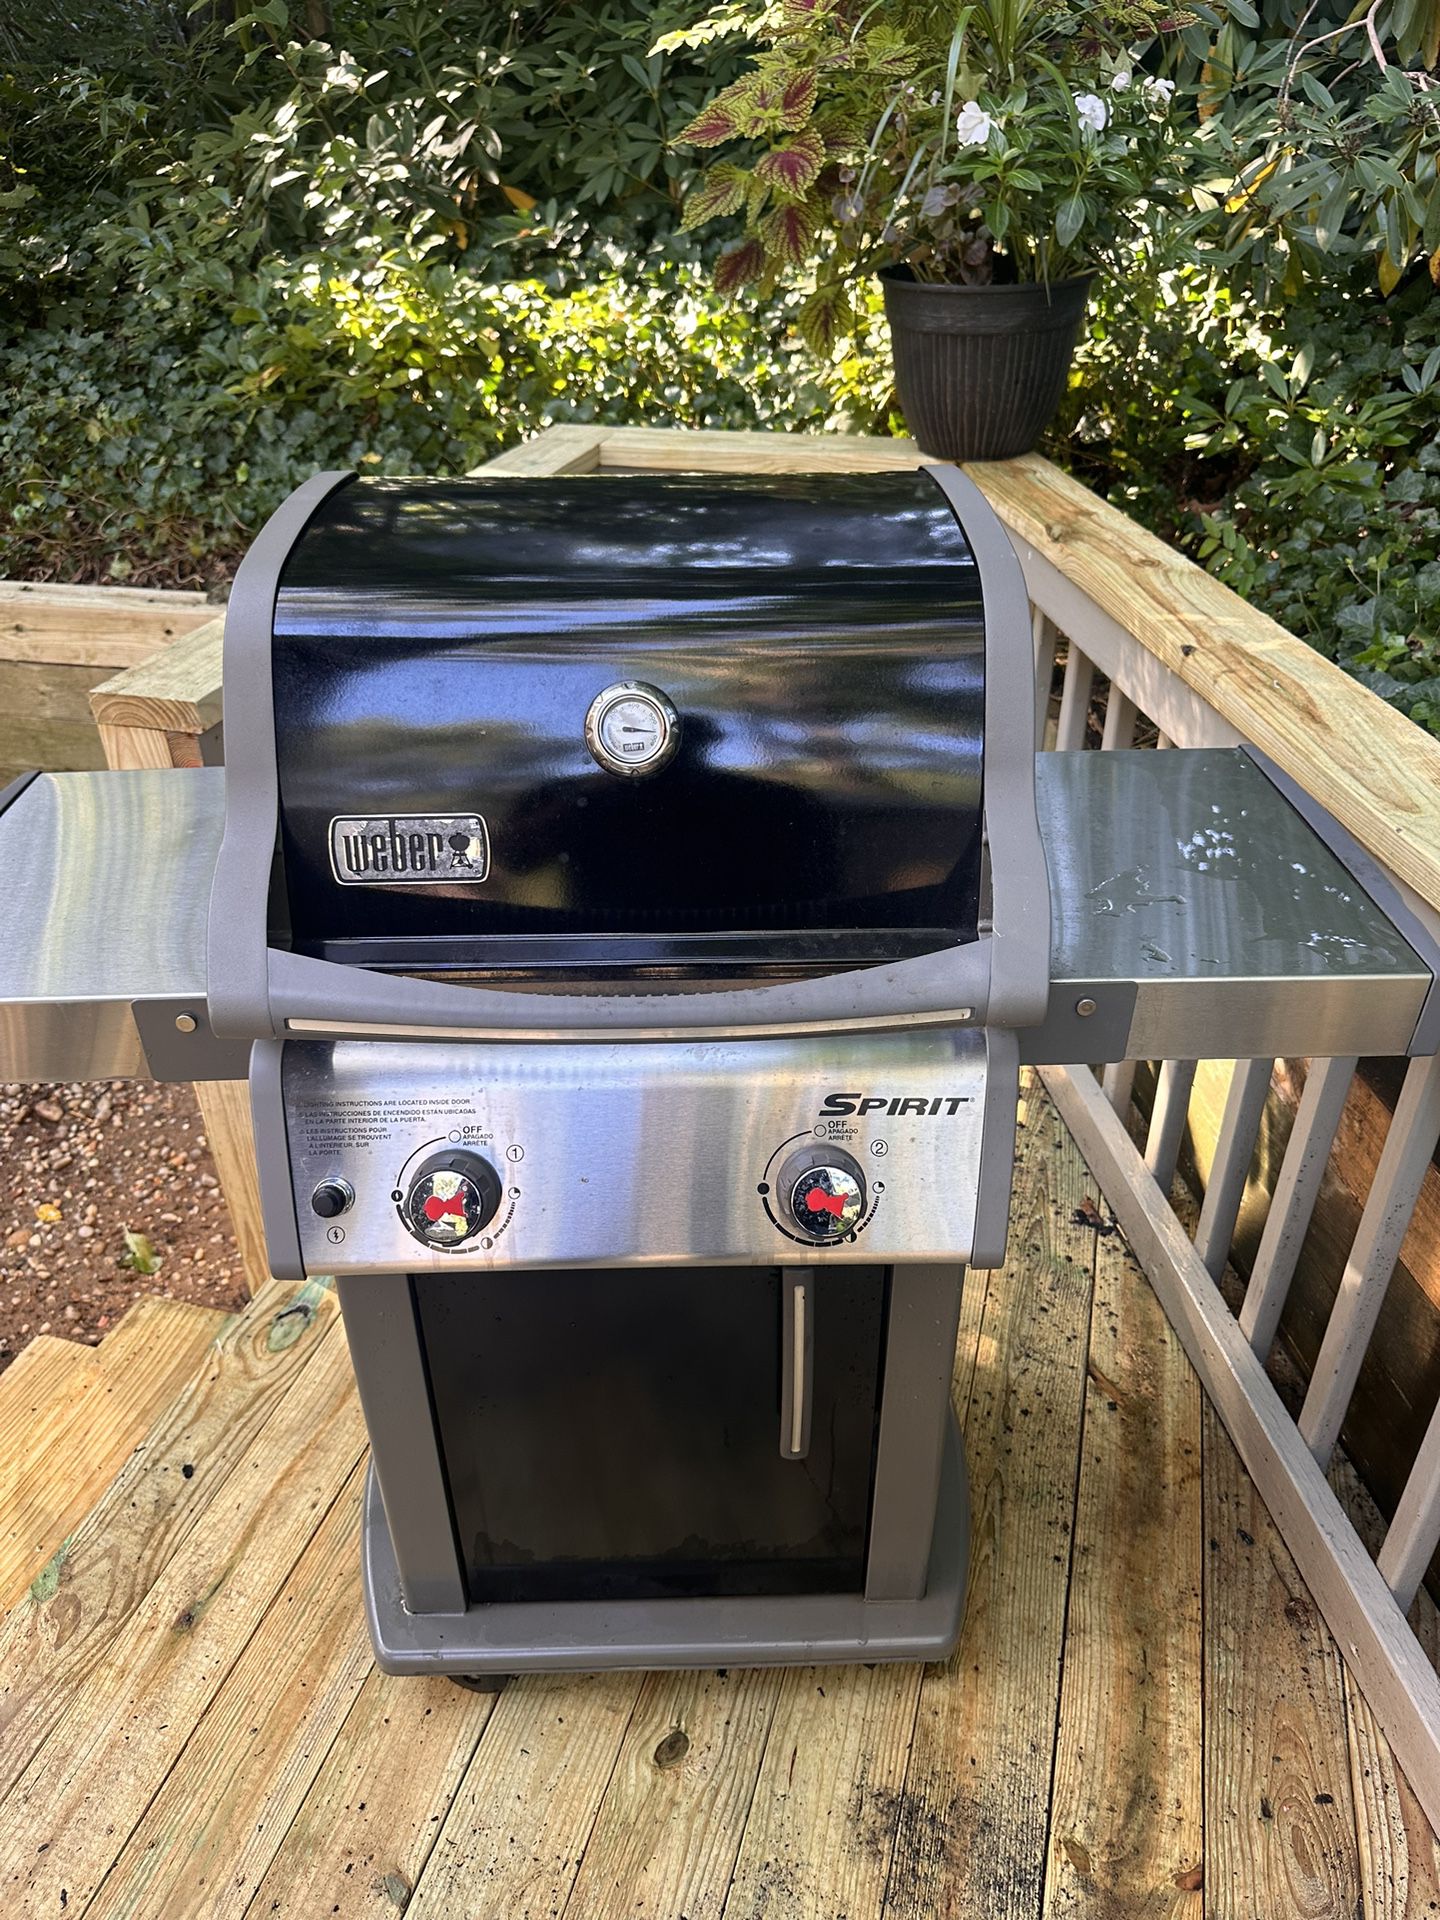 Weber BBQ Grill Great Condition With Cover 